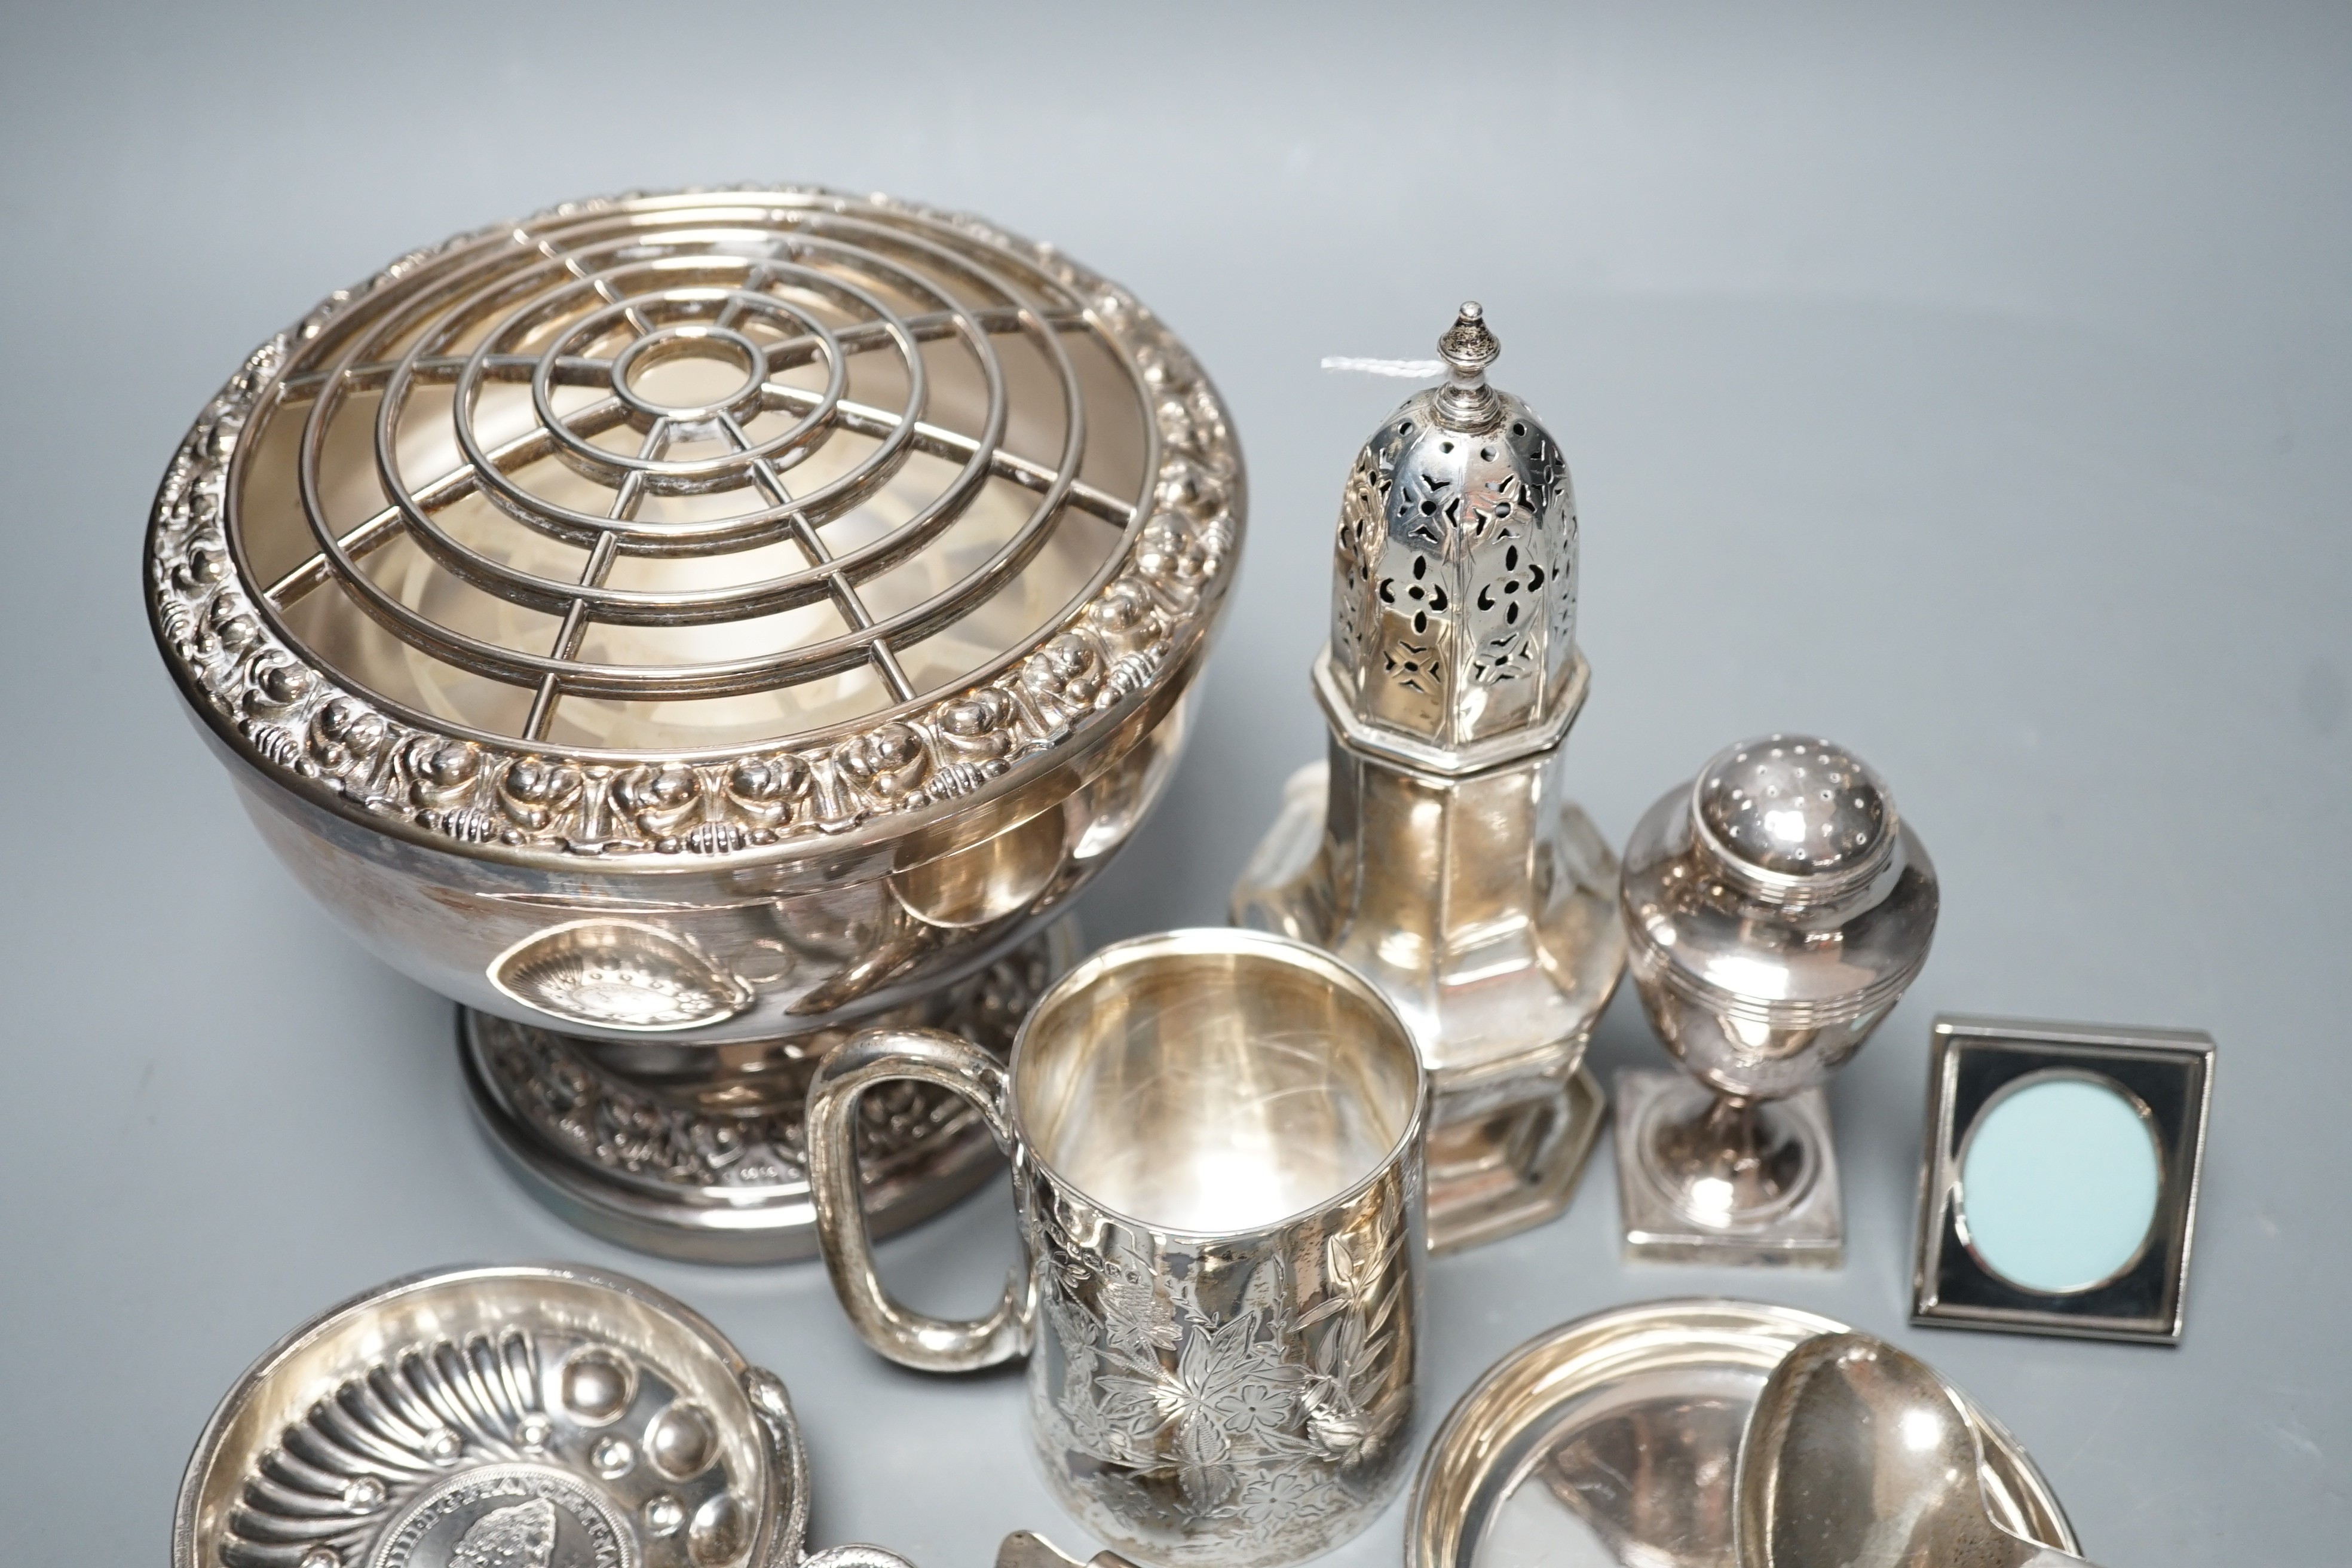 A George III silver vase shaped pepperette, Richard Evans? London, 1788, 88mm, a Victorian silver christening mug, a later silver sugar caster, a French white metal taste vin and other sundry silver and plated items.